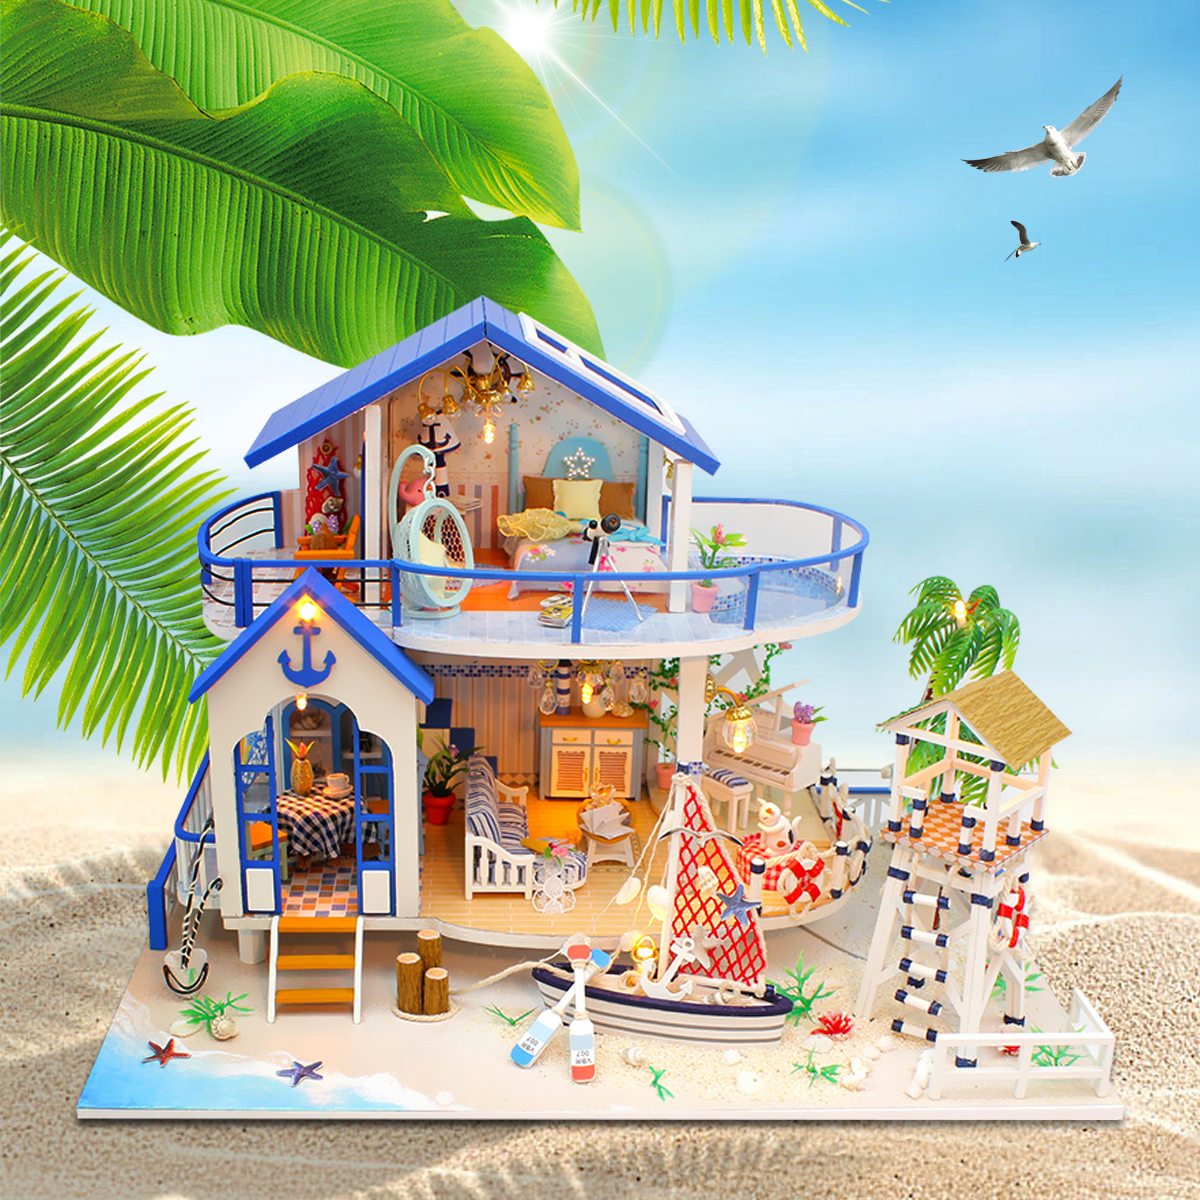 Hoomeda-Legend-Of-The-Blue-Sea-DIY-Handmade-Assemble-Doll-House-Miniature-Model-with-Lights-Music-fo-1844617-3